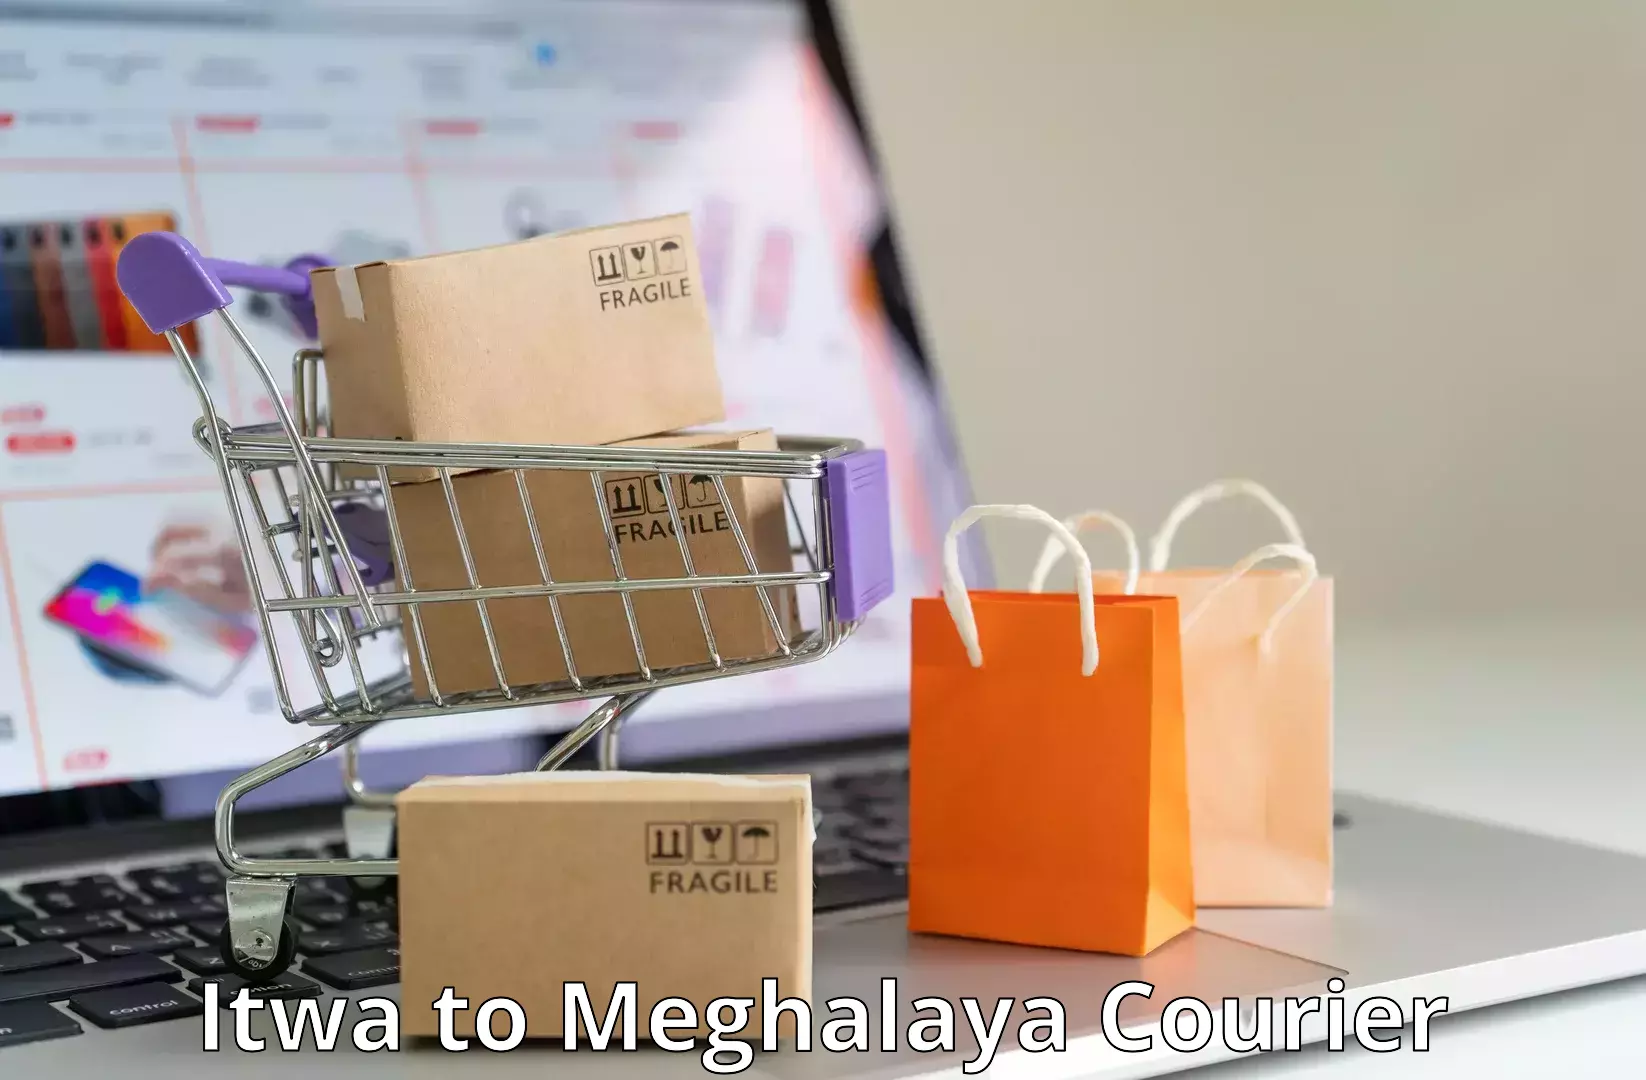 State-of-the-art courier technology Itwa to Meghalaya